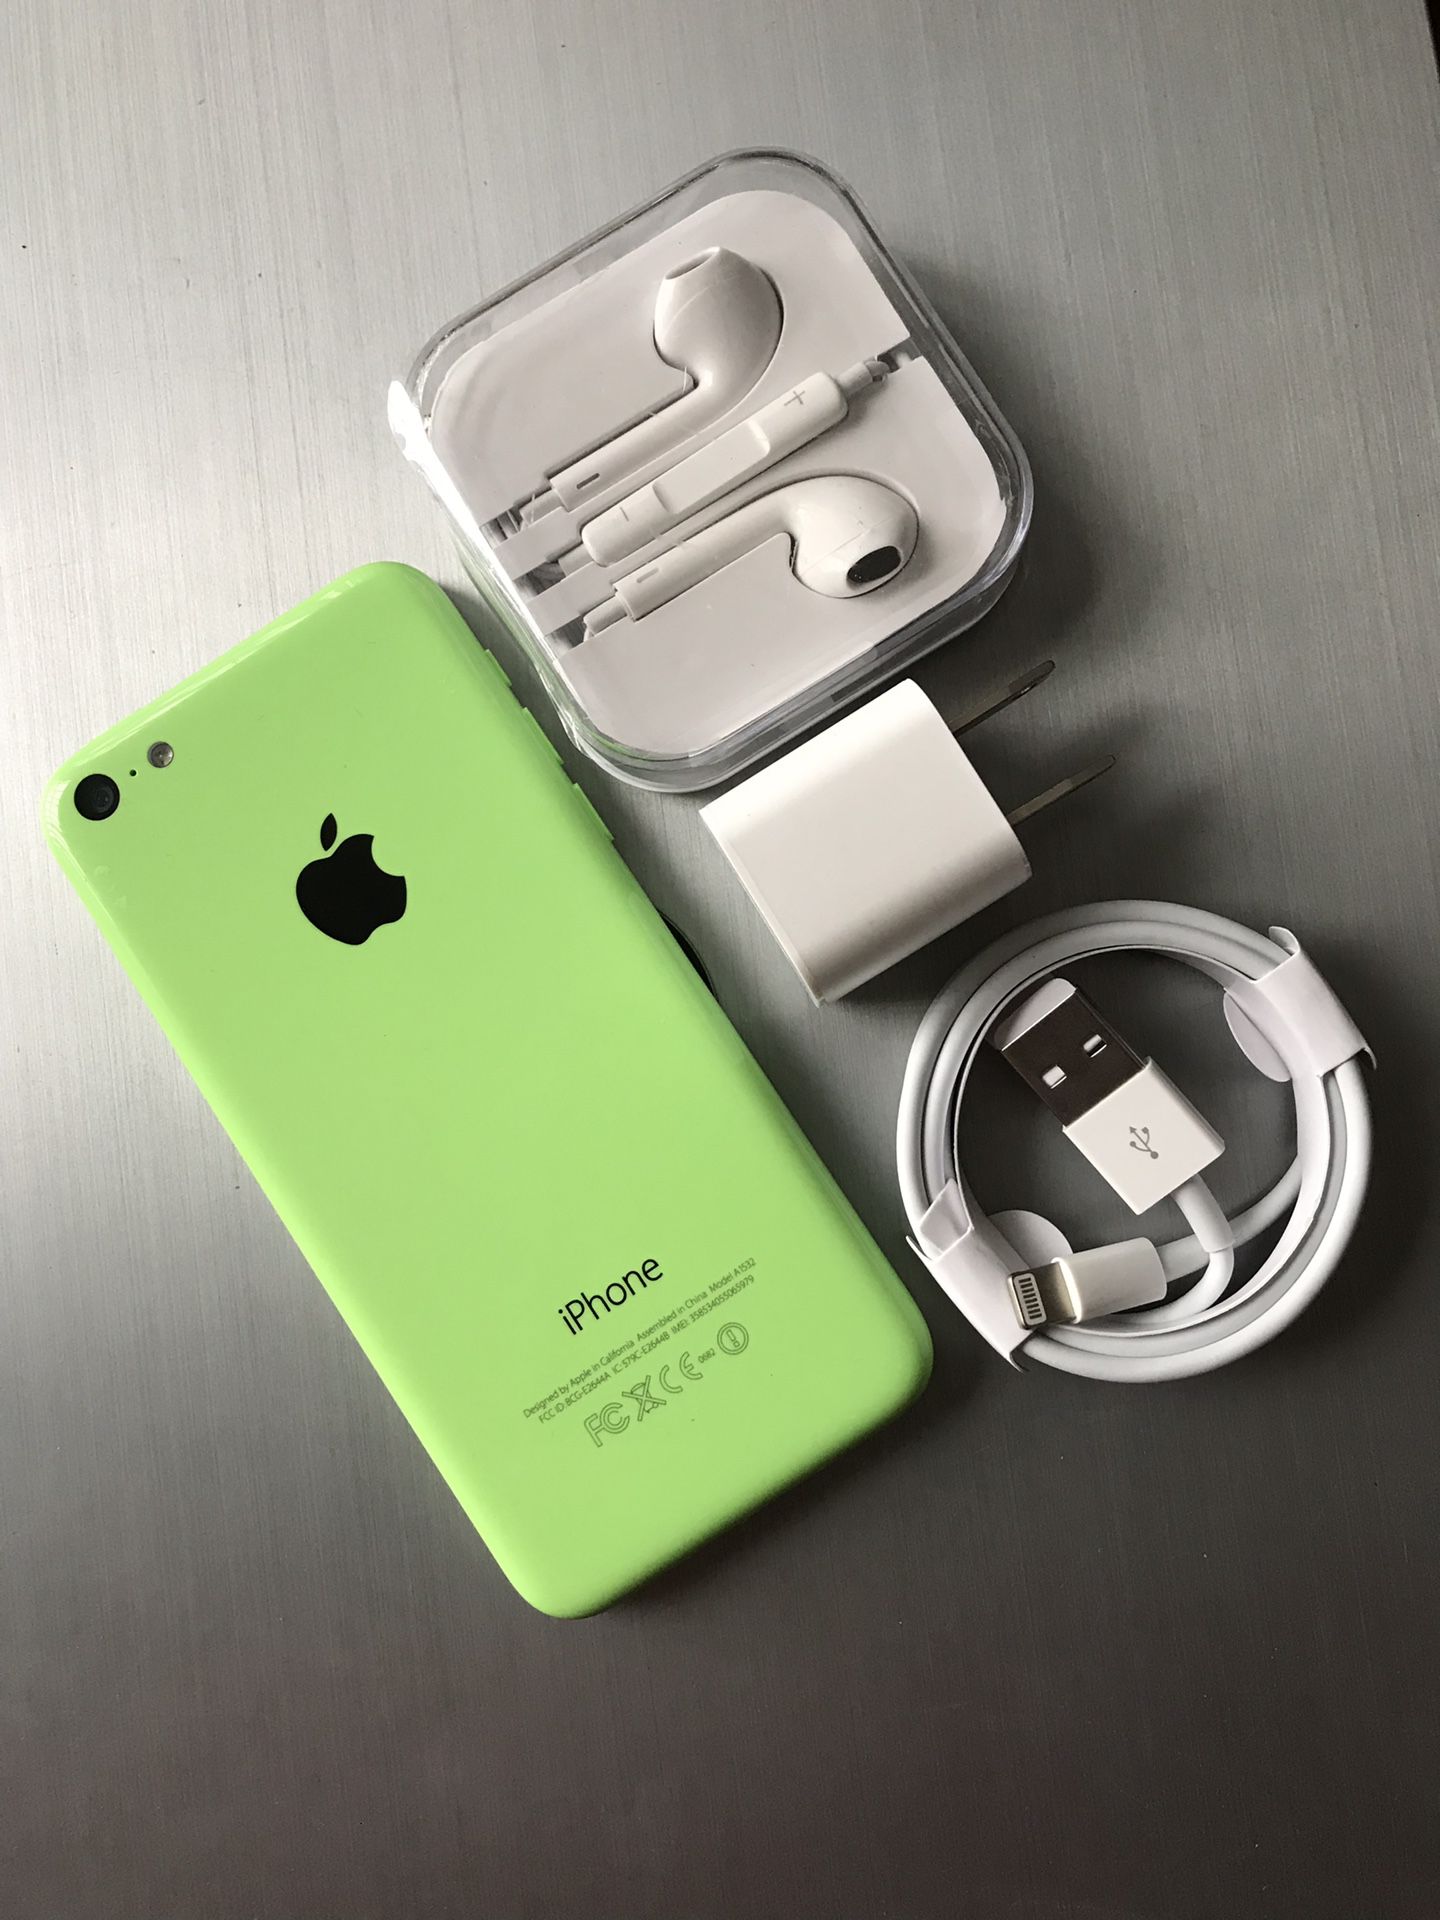 iPhone 5c. Excellent New & Great Condition. Unlocked. Usable Any Company SIM card Any Country